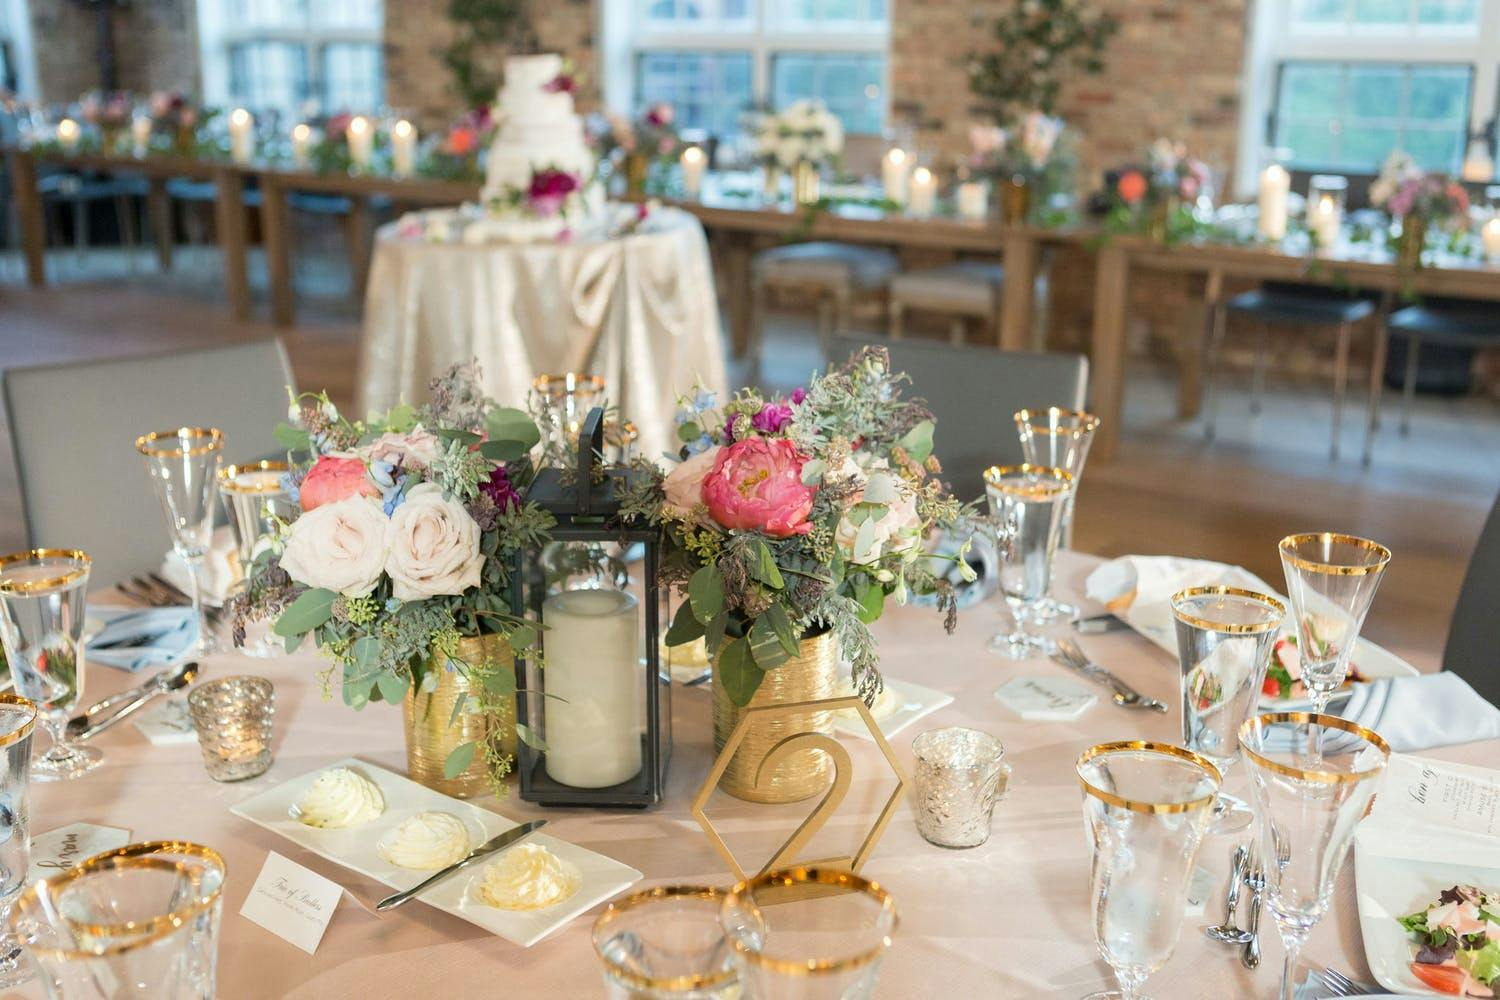 Rustic Wedding Centerpieces With Candlelit Lanterns and Colorful Flowers | PartySlate